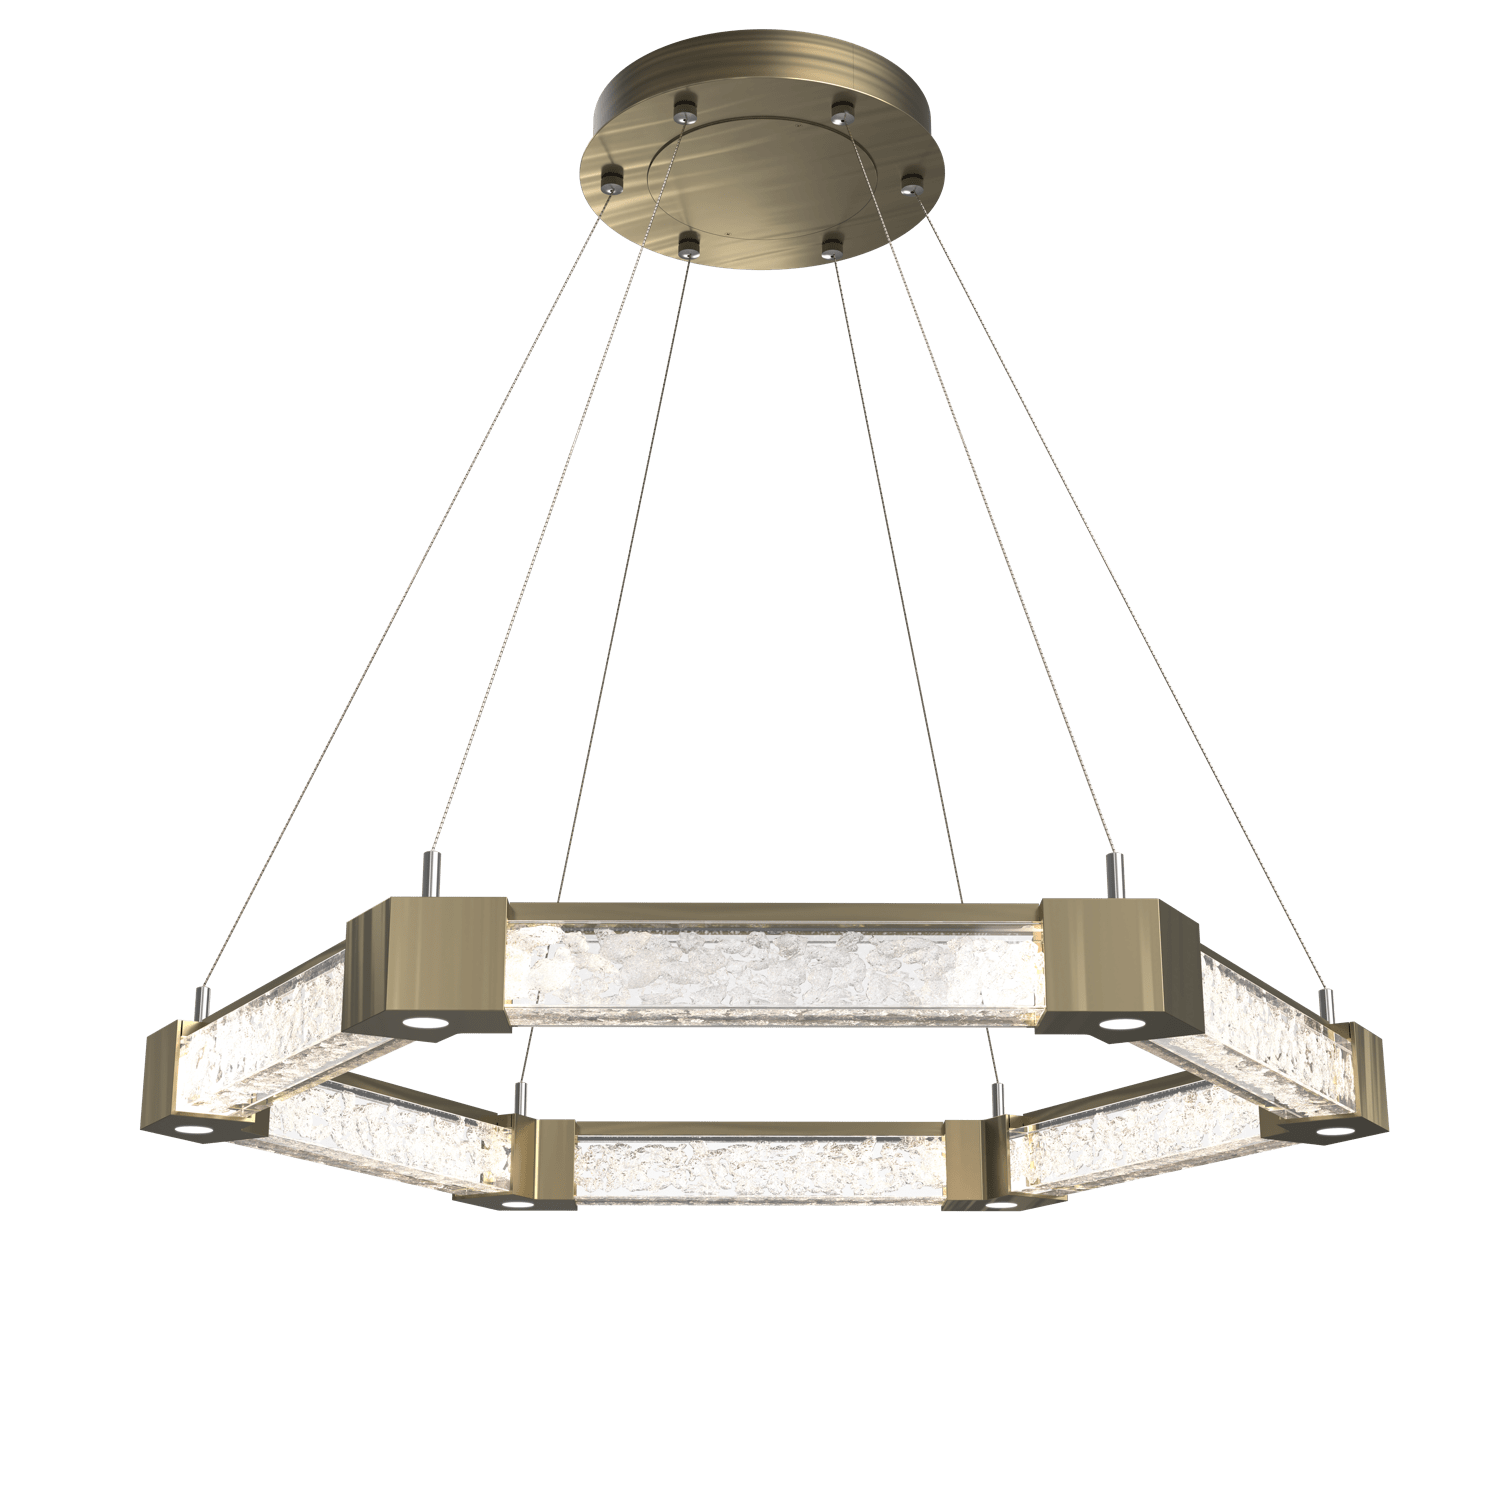 CHB0060-35-HB-GC-Hammerton-Studio-Axis-Hexagonal-Ring-Chandelier-with-Heritage-Brass-finish-and-clear-cast-glass-and-LED-lamping